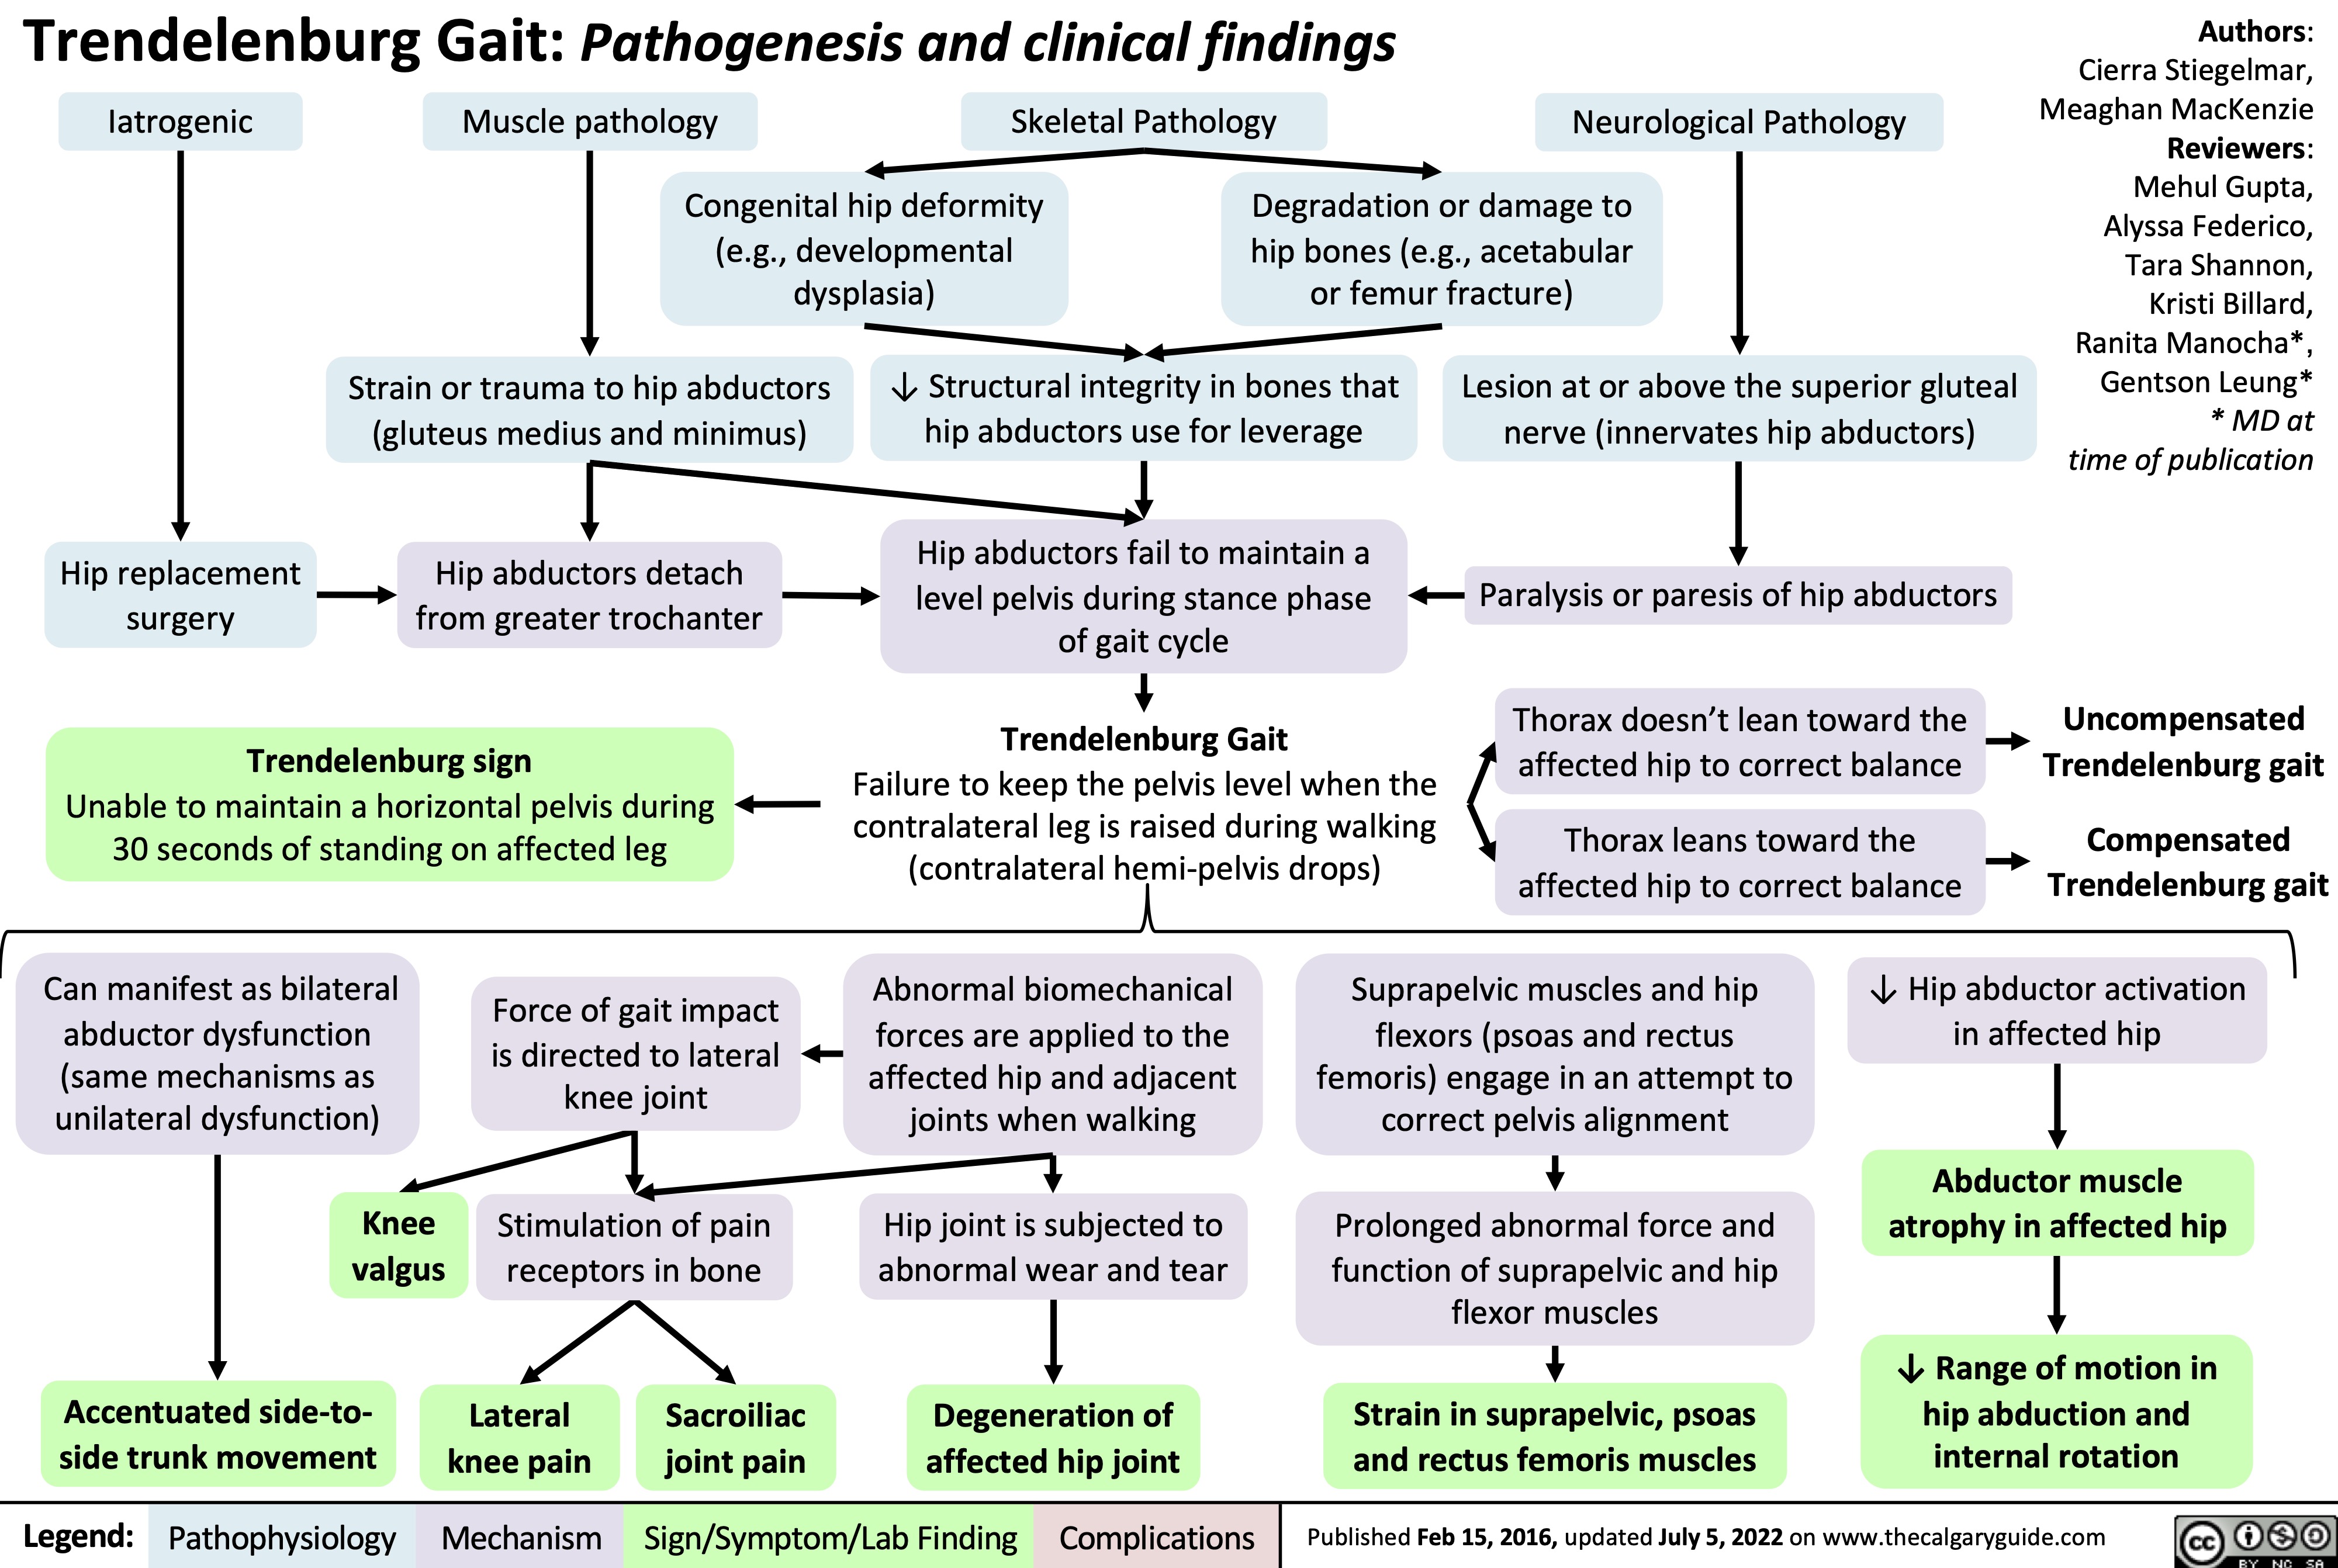 Trendelenburg Gait: Pathogenesis and clinical findings
Authors: Cierra Stiegelmar, Meaghan MacKenzie Reviewers: Mehul Gupta, Alyssa Federico, Tara Shannon, Kristi Billard, Ranita Manocha*, Gentson Leung* * MD at time of publication
Uncompensated Trendelenburg gait
Compensated Trendelenburg gait
    Iatrogenic
Muscle pathology Skeletal Pathology Neurological Pathology
       Congenital hip deformity (e.g., developmental dysplasia)
Degradation or damage to hip bones (e.g., acetabular or femur fracture)
          Hip replacement surgery
Strain or trauma to hip abductors (gluteus medius and minimus)
Hip abductors detach from greater trochanter
↓ Structural integrity in bones that hip abductors use for leverage
Hip abductors fail to maintain a level pelvis during stance phase of gait cycle
Trendelenburg Gait
Failure to keep the pelvis level when the contralateral leg is raised during walking (contralateral hemi-pelvis drops)
Lesion at or above the superior gluteal nerve (innervates hip abductors)
Paralysis or paresis of hip abductors
Thorax doesn’t lean toward the affected hip to correct balance
Thorax leans toward the affected hip to correct balance
   Trendelenburg sign
Unable to maintain a horizontal pelvis during 30 seconds of standing on affected leg
      Can manifest as bilateral abductor dysfunction
(same mechanisms as unilateral dysfunction)
Knee valgus
Accentuated side-to- side trunk movement
Force of gait impact is directed to lateral knee joint
Stimulation of pain receptors in bone
Lateral Sacroiliac knee pain joint pain
Abnormal biomechanical forces are applied to the
affected hip and adjacent joints when walking
Hip joint is subjected to abnormal wear and tear
Degeneration of affected hip joint
Suprapelvic muscles and hip flexors (psoas and rectus
femoris) engage in an attempt to correct pelvis alignment
Prolonged abnormal force and function of suprapelvic and hip flexor muscles
Strain in suprapelvic, psoas and rectus femoris muscles
↓ Hip abductor activation in affected hip
Abductor muscle atrophy in affected hip
↓ Range of motion in hip abduction and internal rotation
                    Legend:
 Pathophysiology
Mechanism
Sign/Symptom/Lab Finding
 Complications
 Published Feb 15, 2016, updated July 5, 2022 on www.thecalgaryguide.com
   